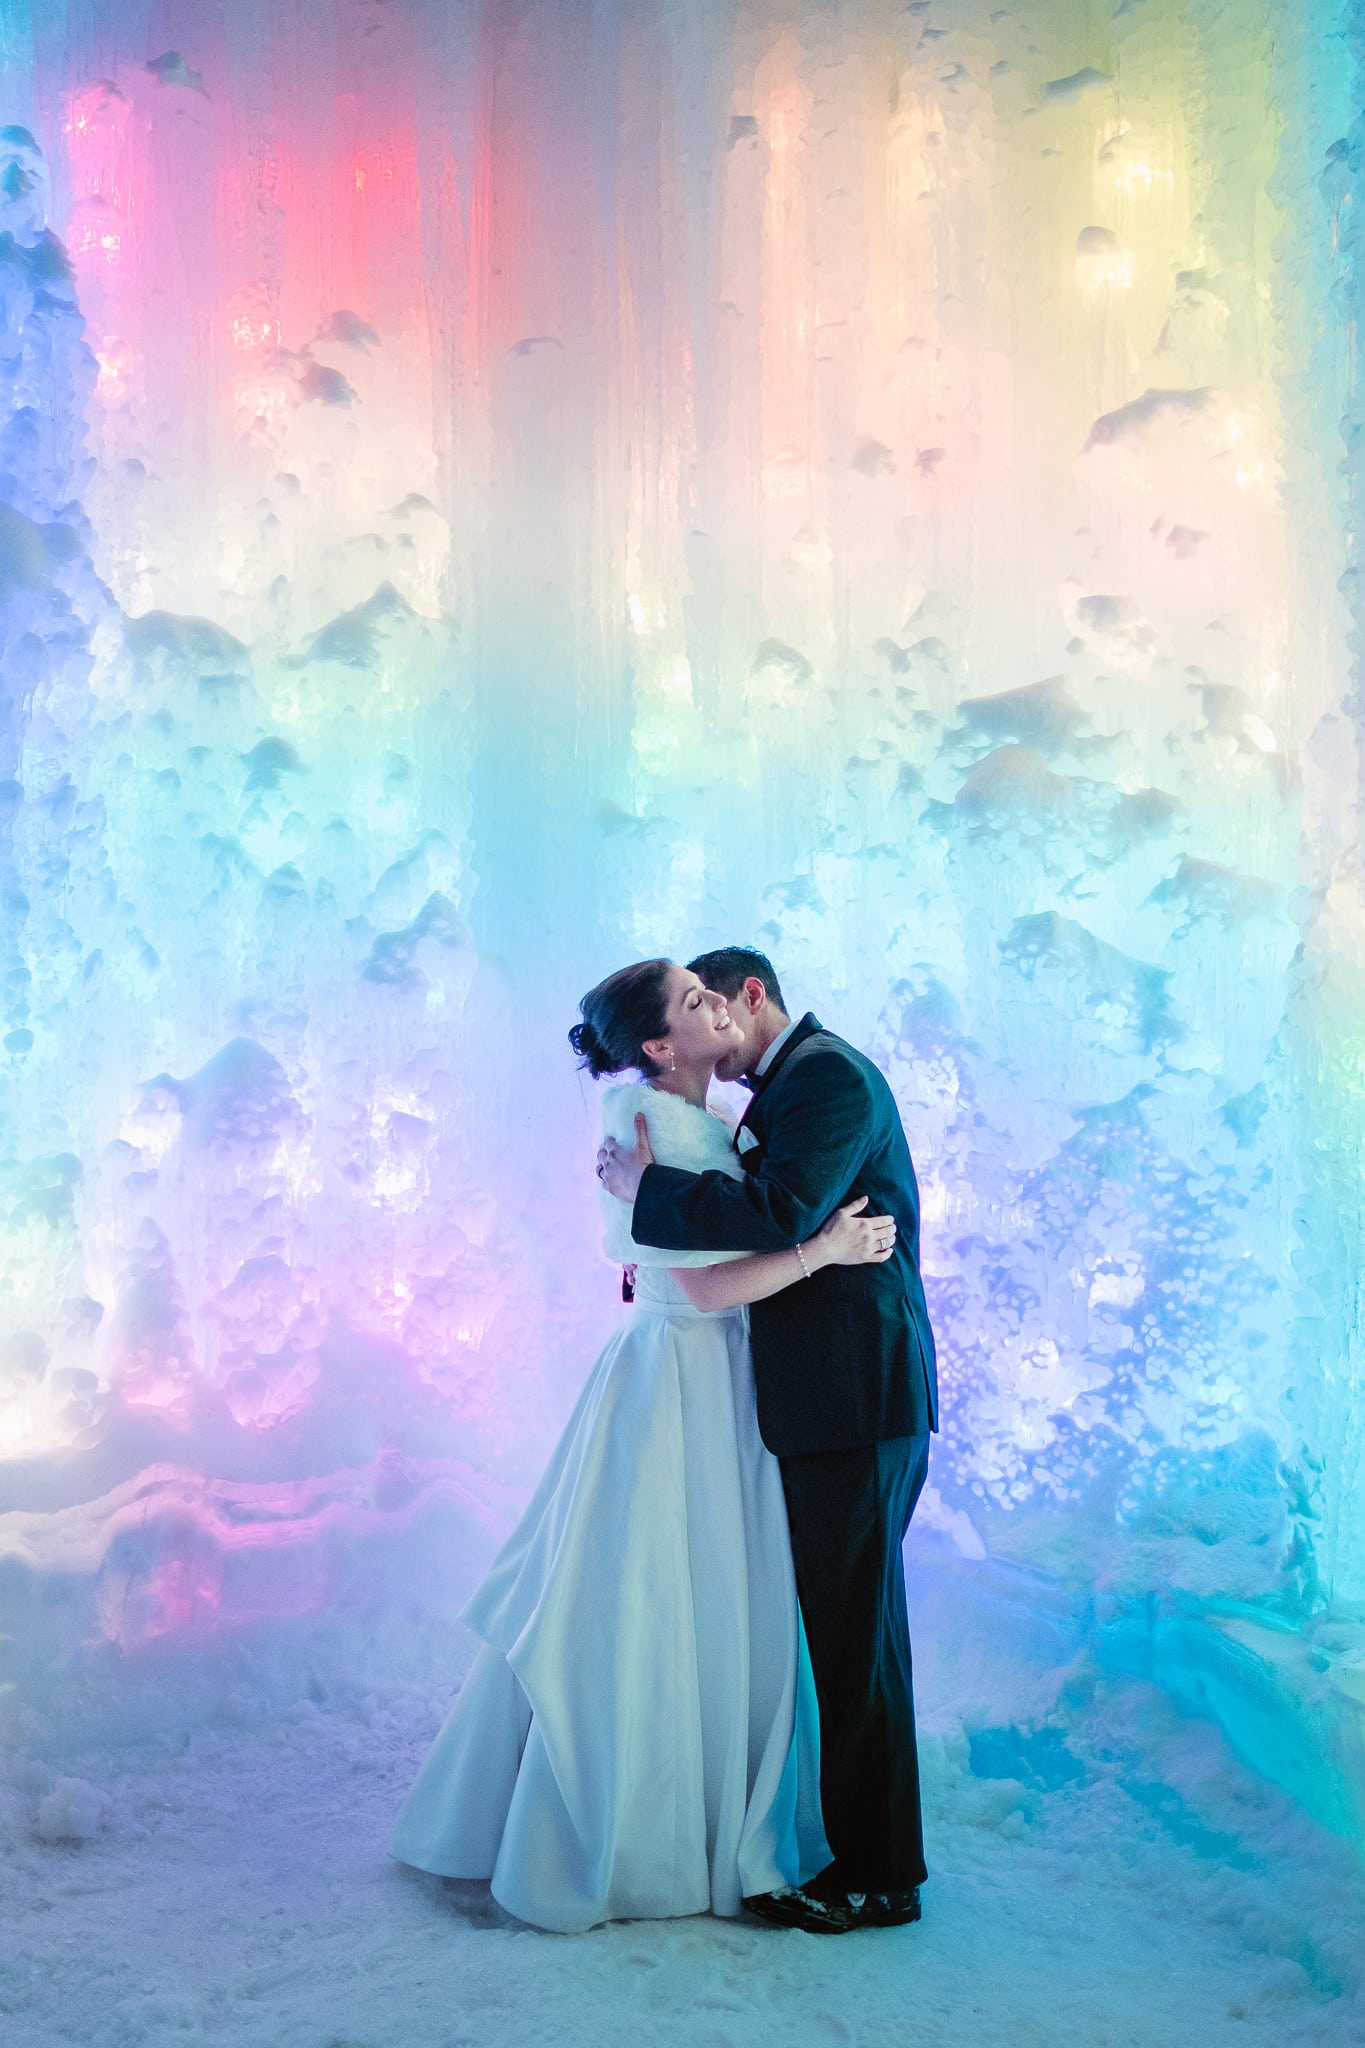 Ice Castles wedding photography, Dillon Colorado winter elopement, bride and groom inside ice castle lit up with rainbow lights